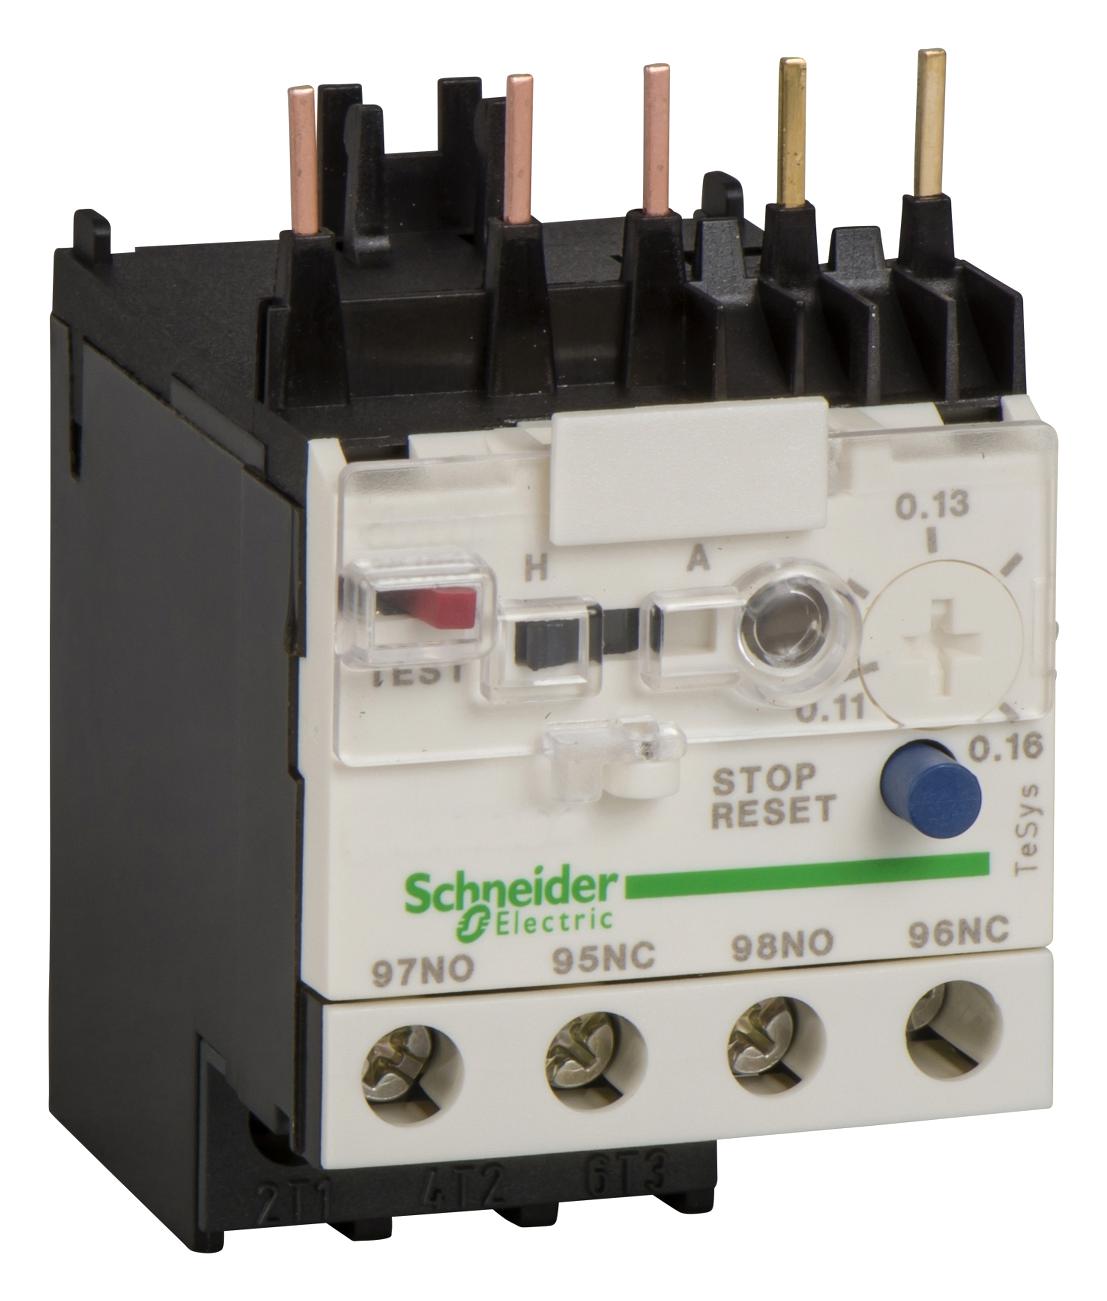 LR2K0303 THERMAL OVERLOAD RELAY, 0.36A, 690VAC SCHNEIDER ELECTRIC